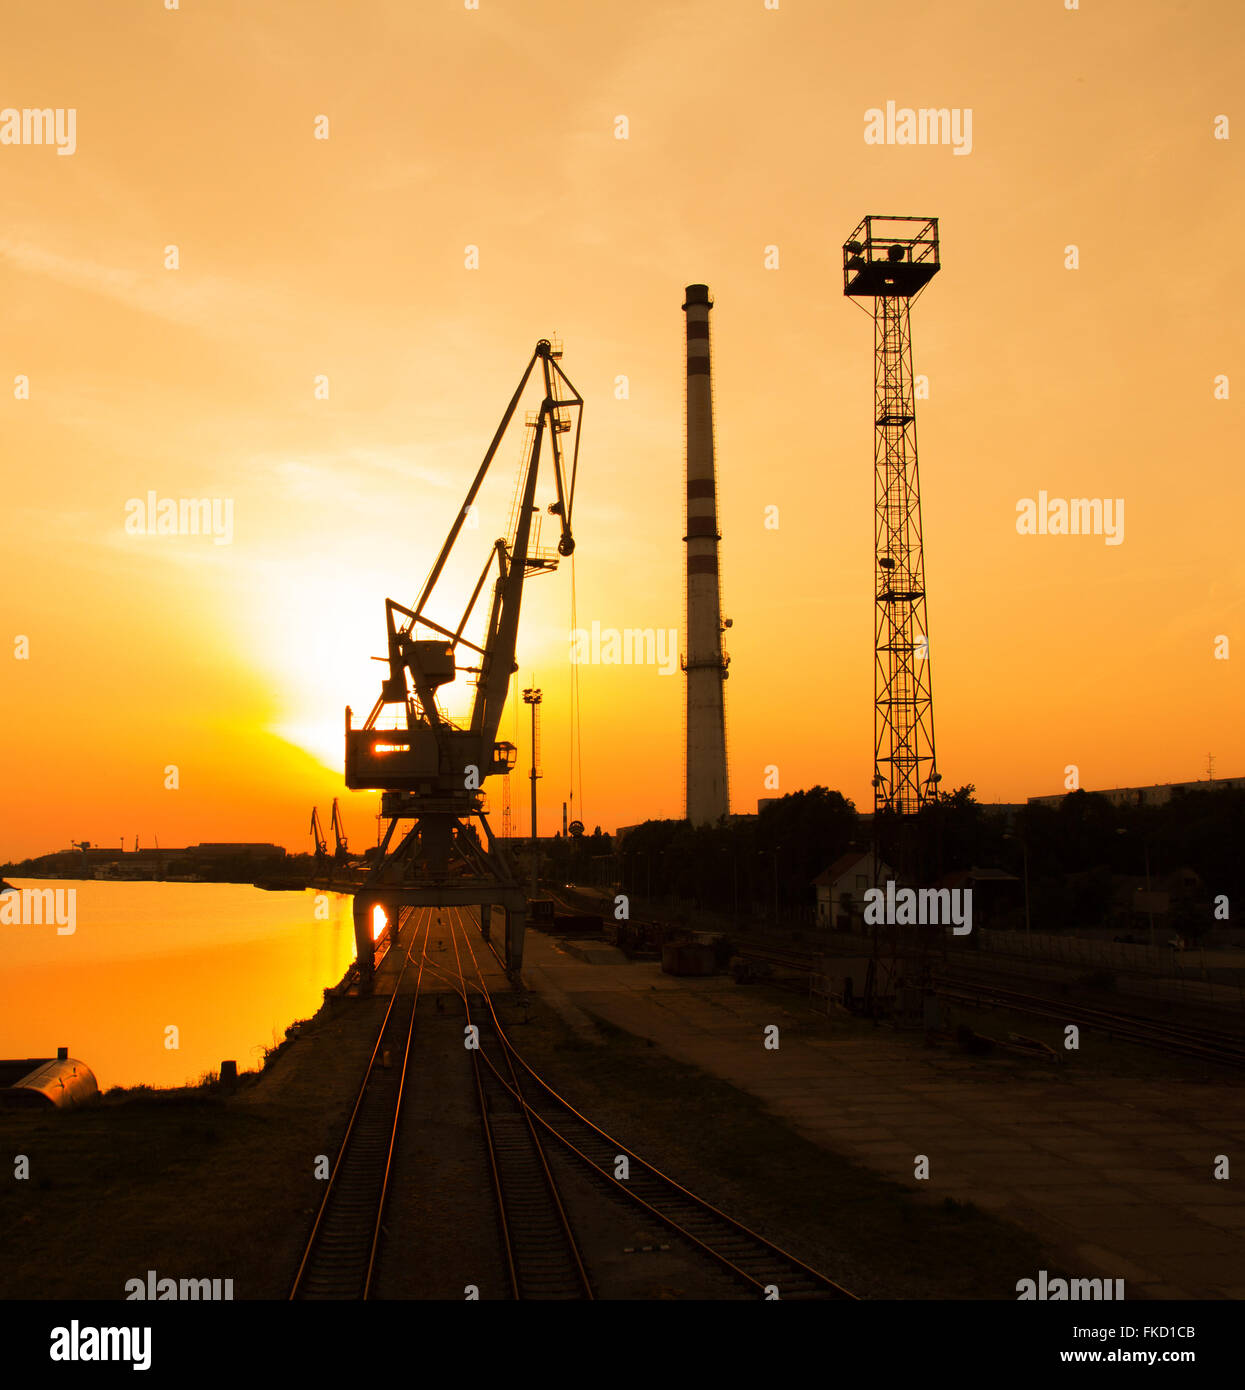 Portal crane in sunset with chimney and railroads Stock Photo